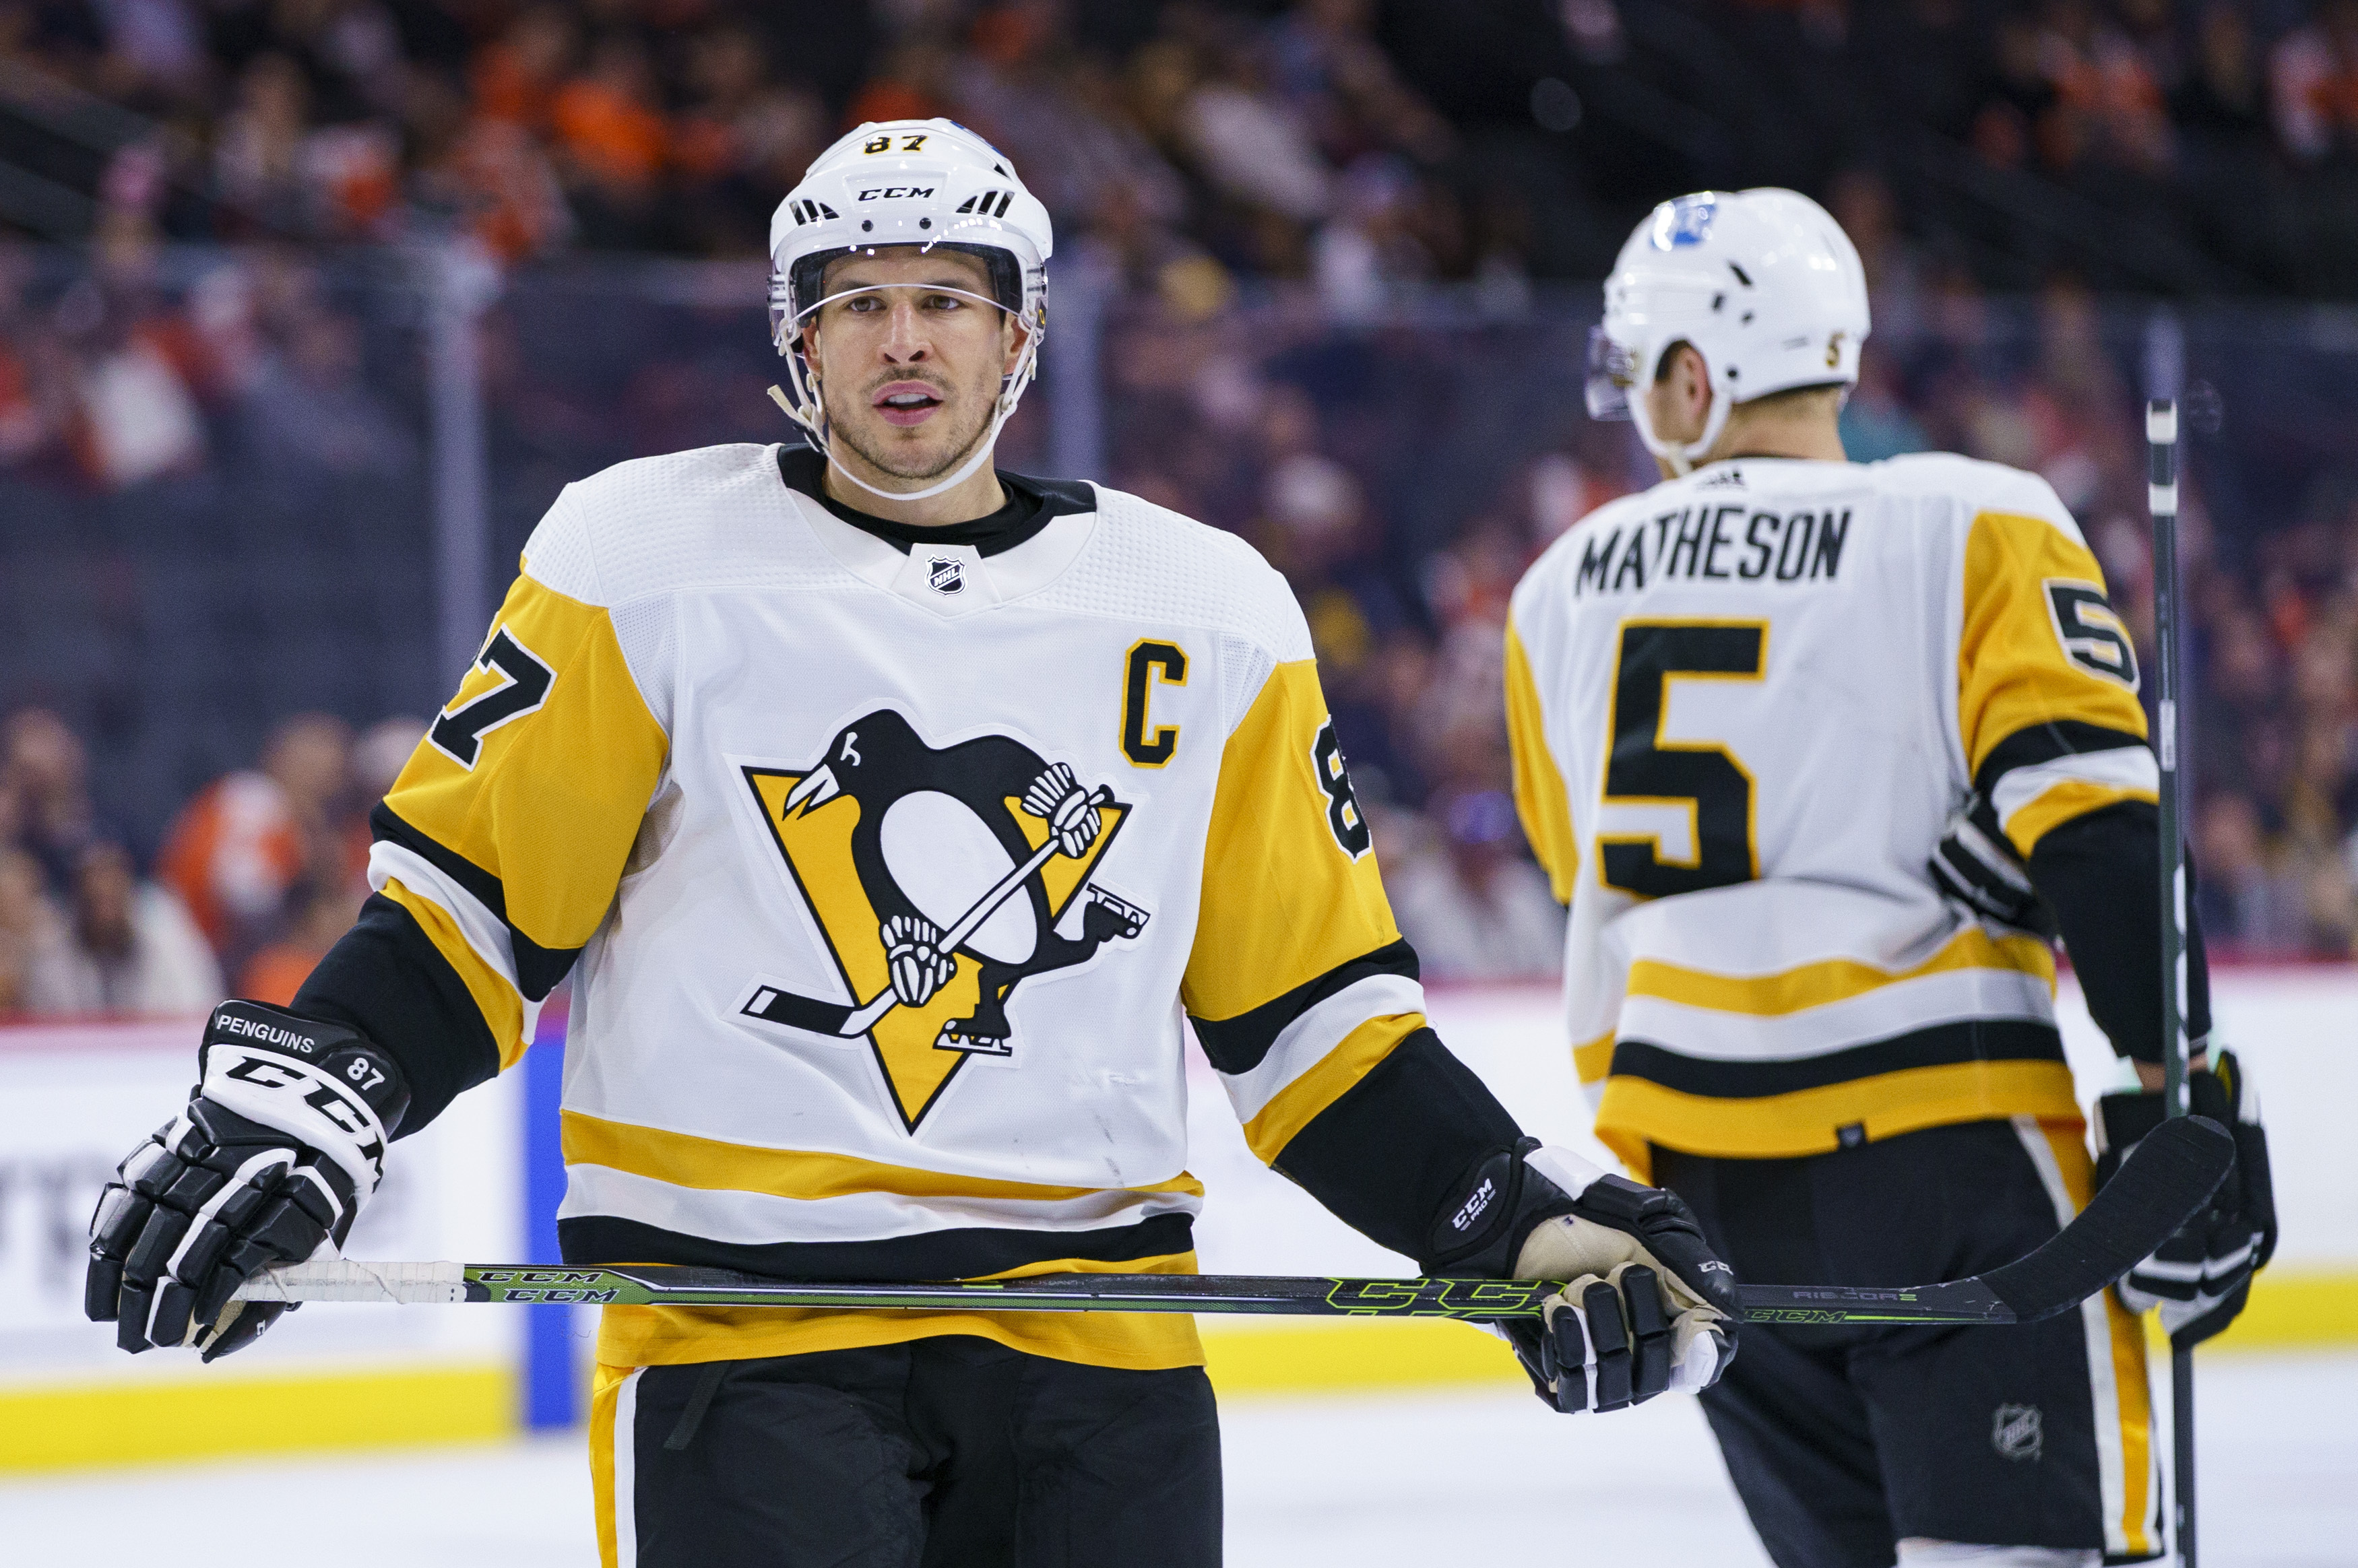 Edmonton Oilers at Pittsburgh Penguins free live stream (4/26/22) How to watch NHL game, time, channel